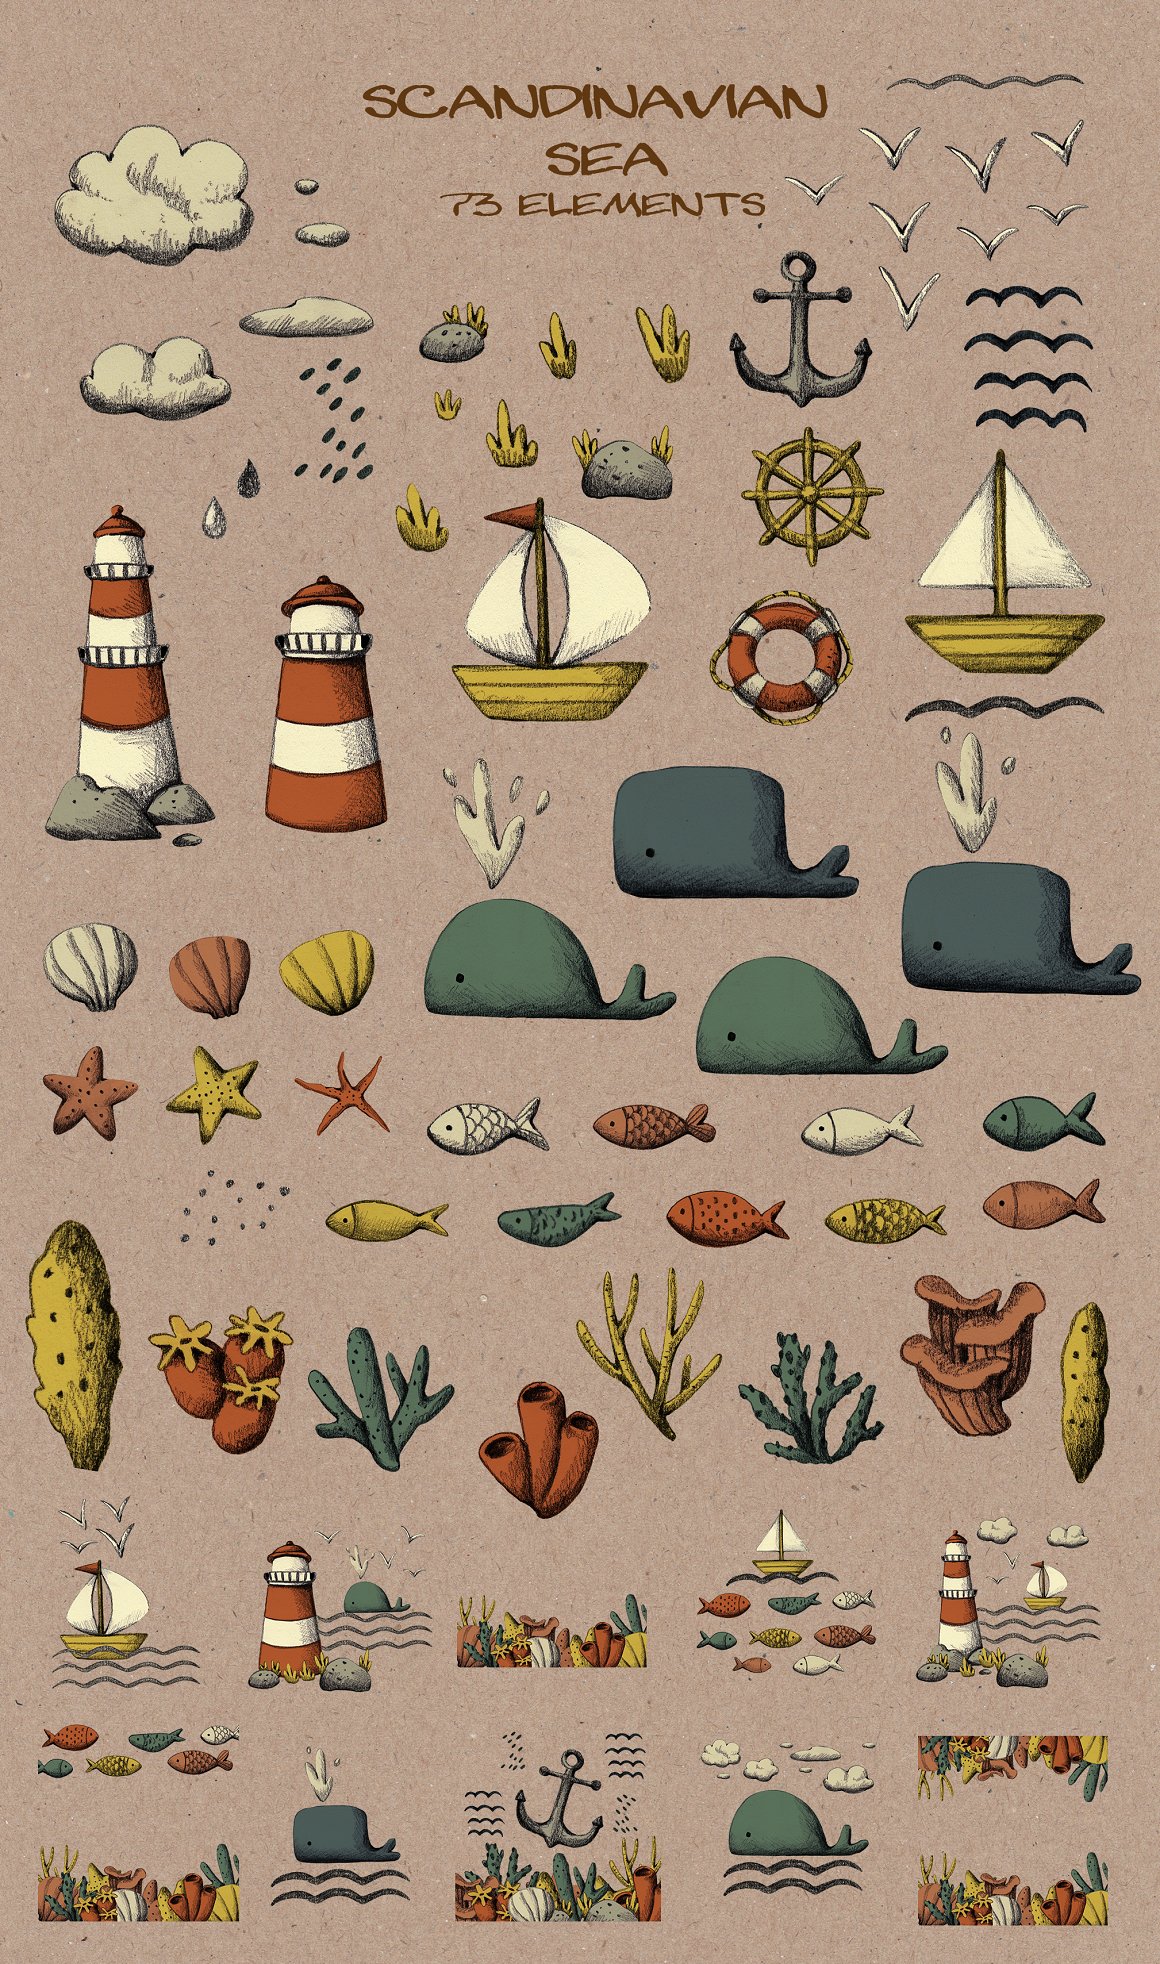 Clipart of different illustrations of scandinavian sea.